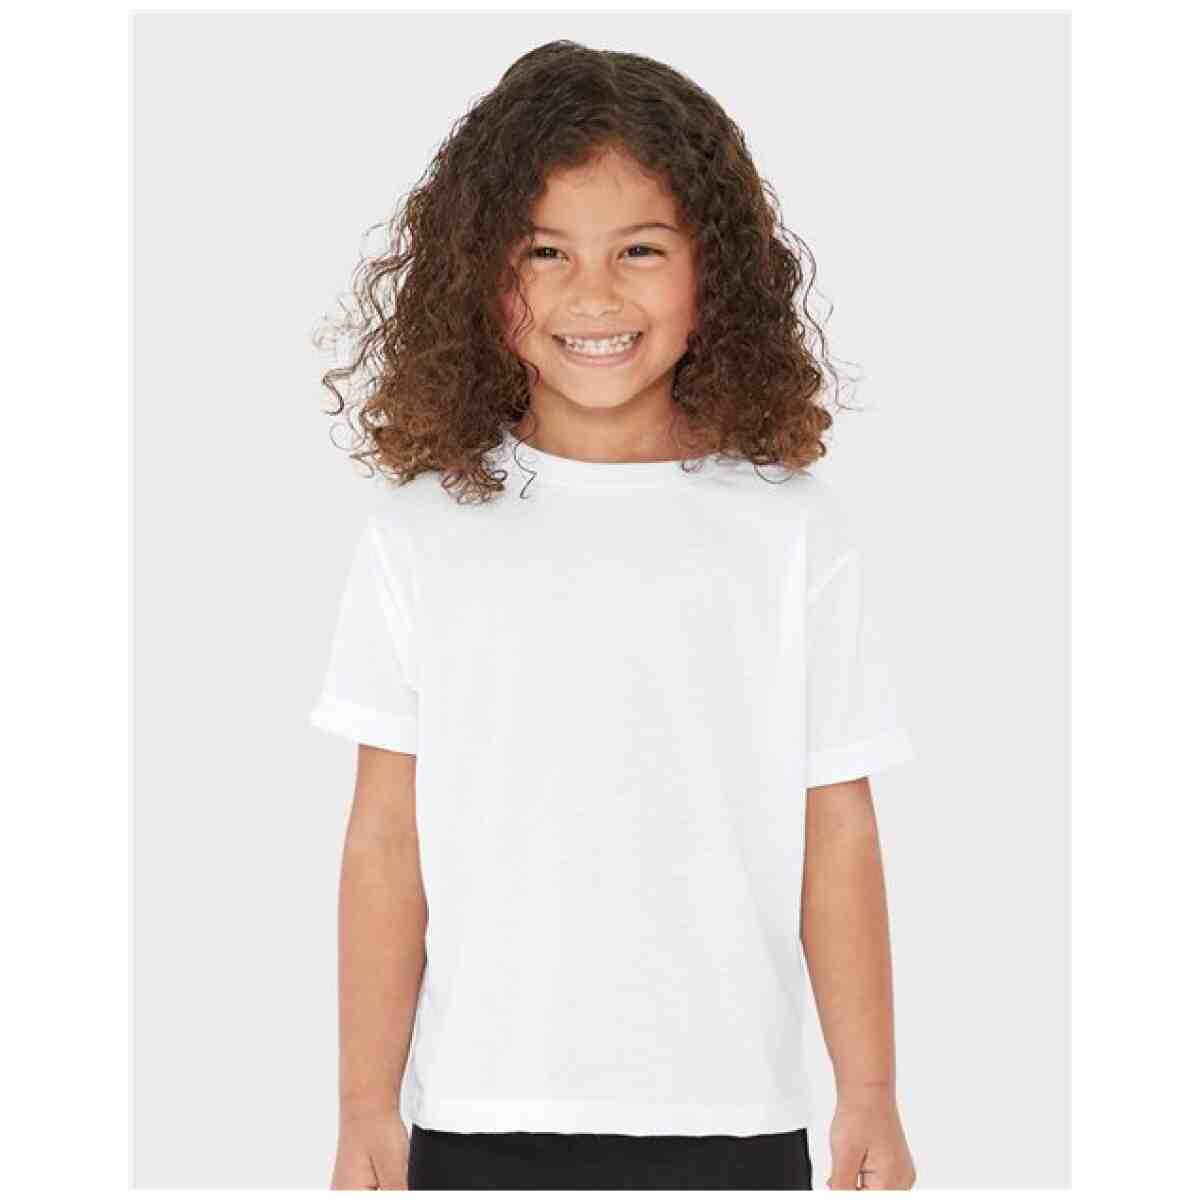 Sublivie Toddler Polyester Sublimation Tee - 1310 SUBLIVIE®